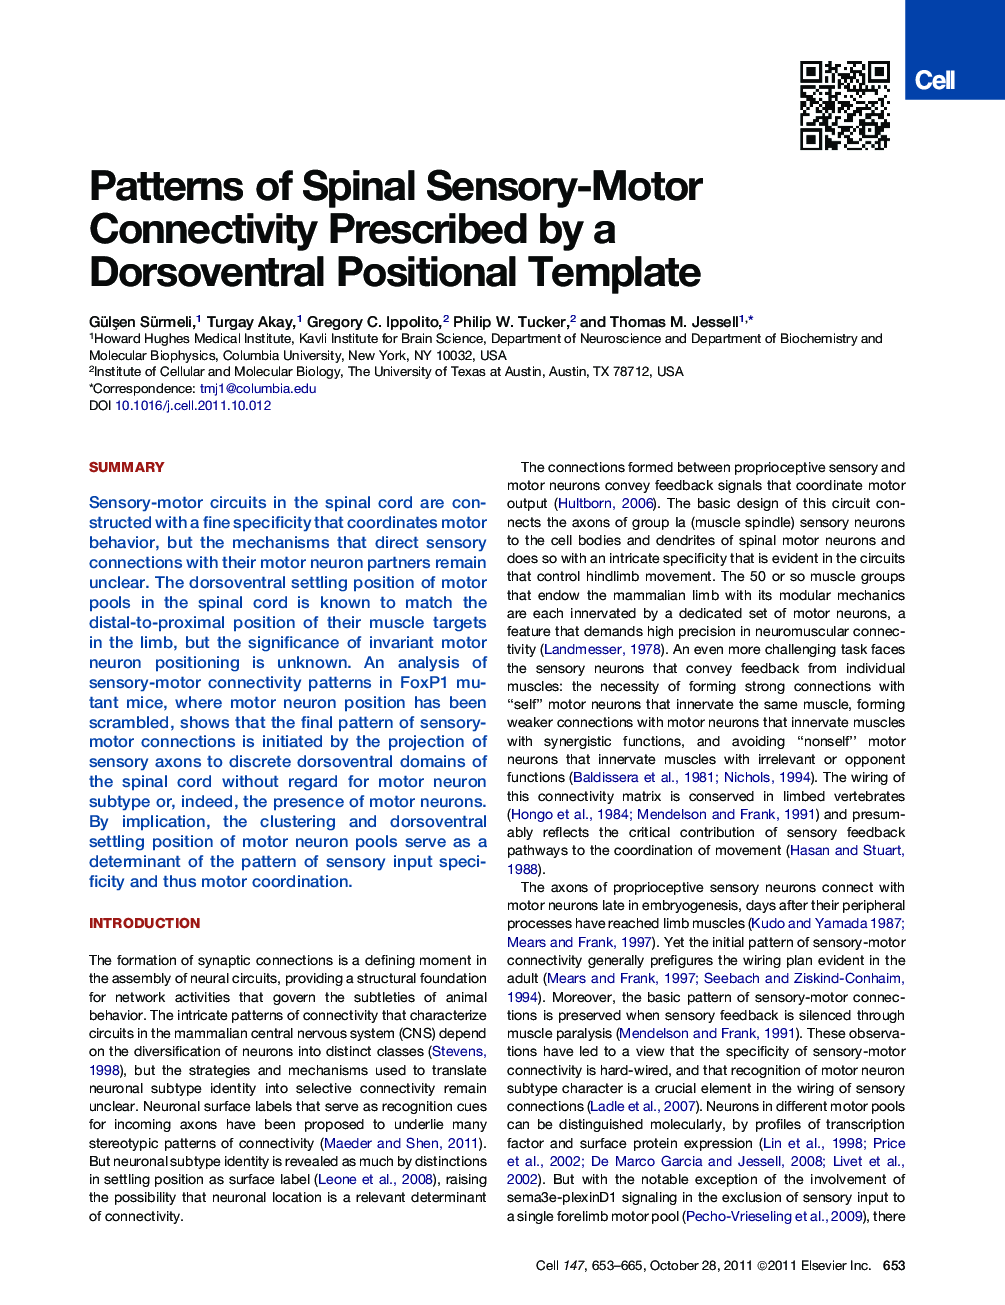 Patterns of Spinal Sensory-Motor Connectivity Prescribed by a Dorsoventral Positional Template